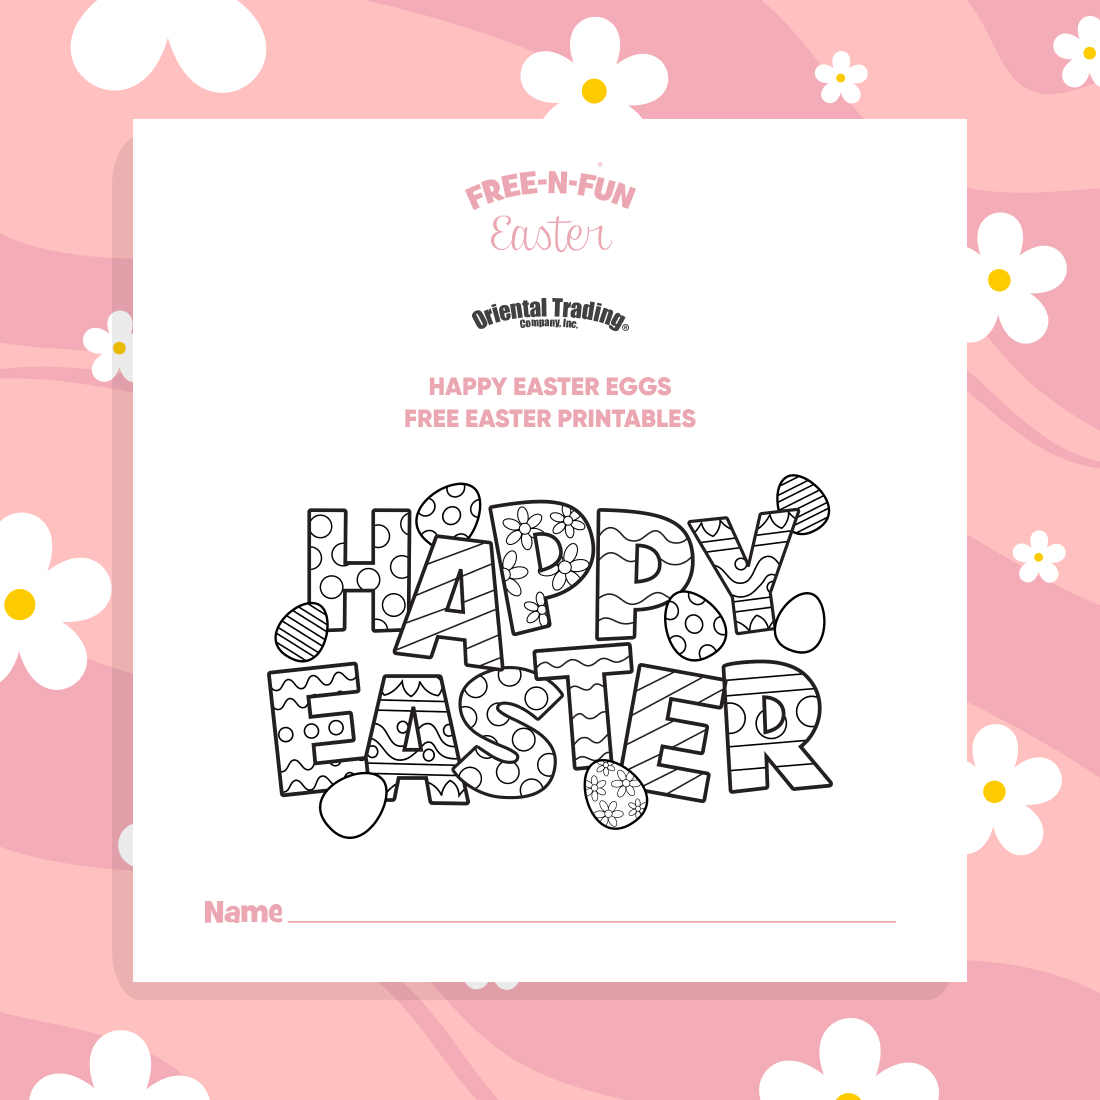 Happy Easter Eggs free easter printables cover image.